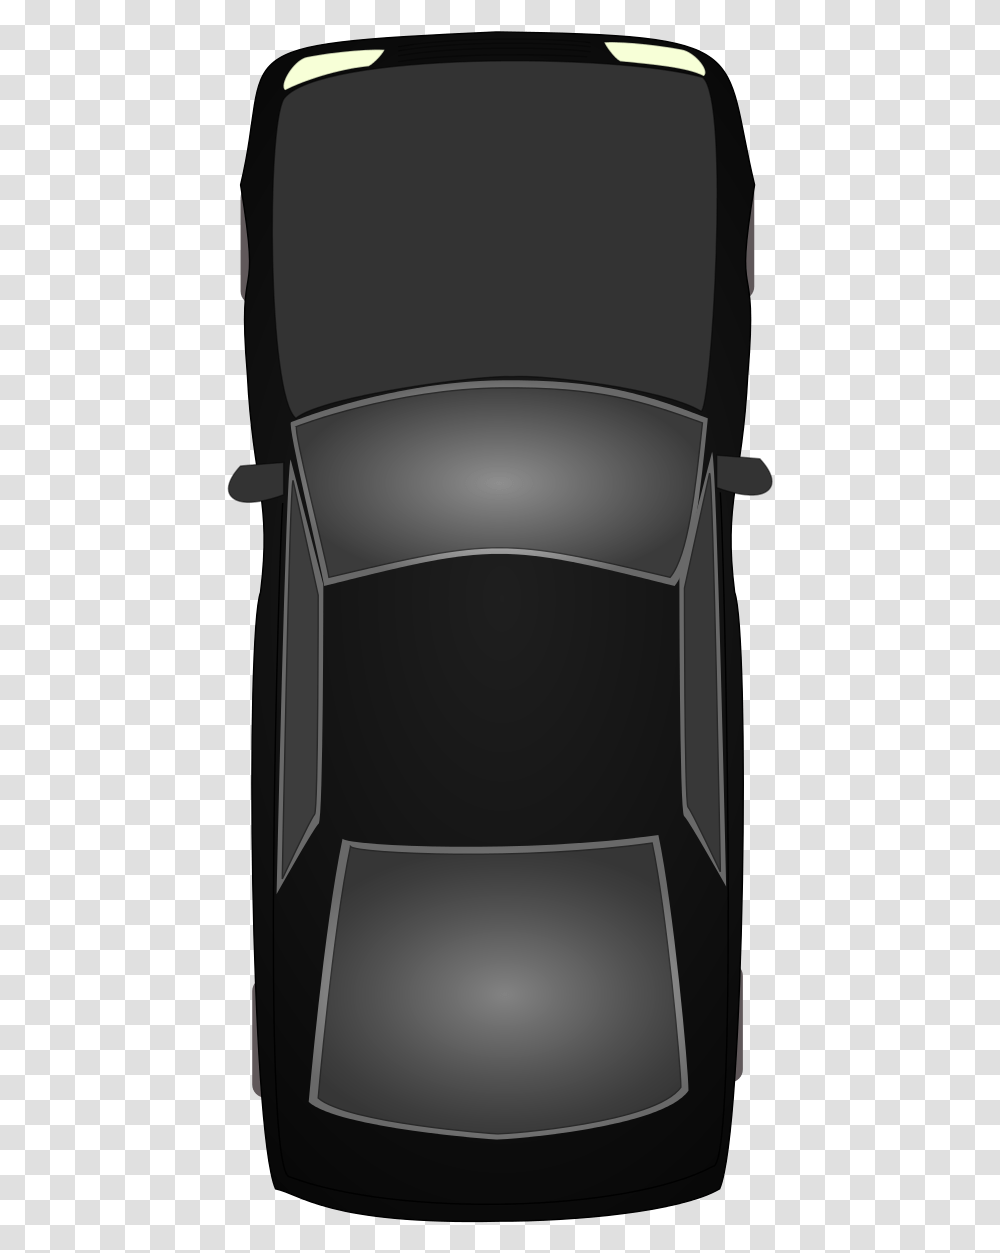 Car Top View Icons No Attribution Top View Cartoon Car, Chair, Furniture, Lamp, Gray Transparent Png